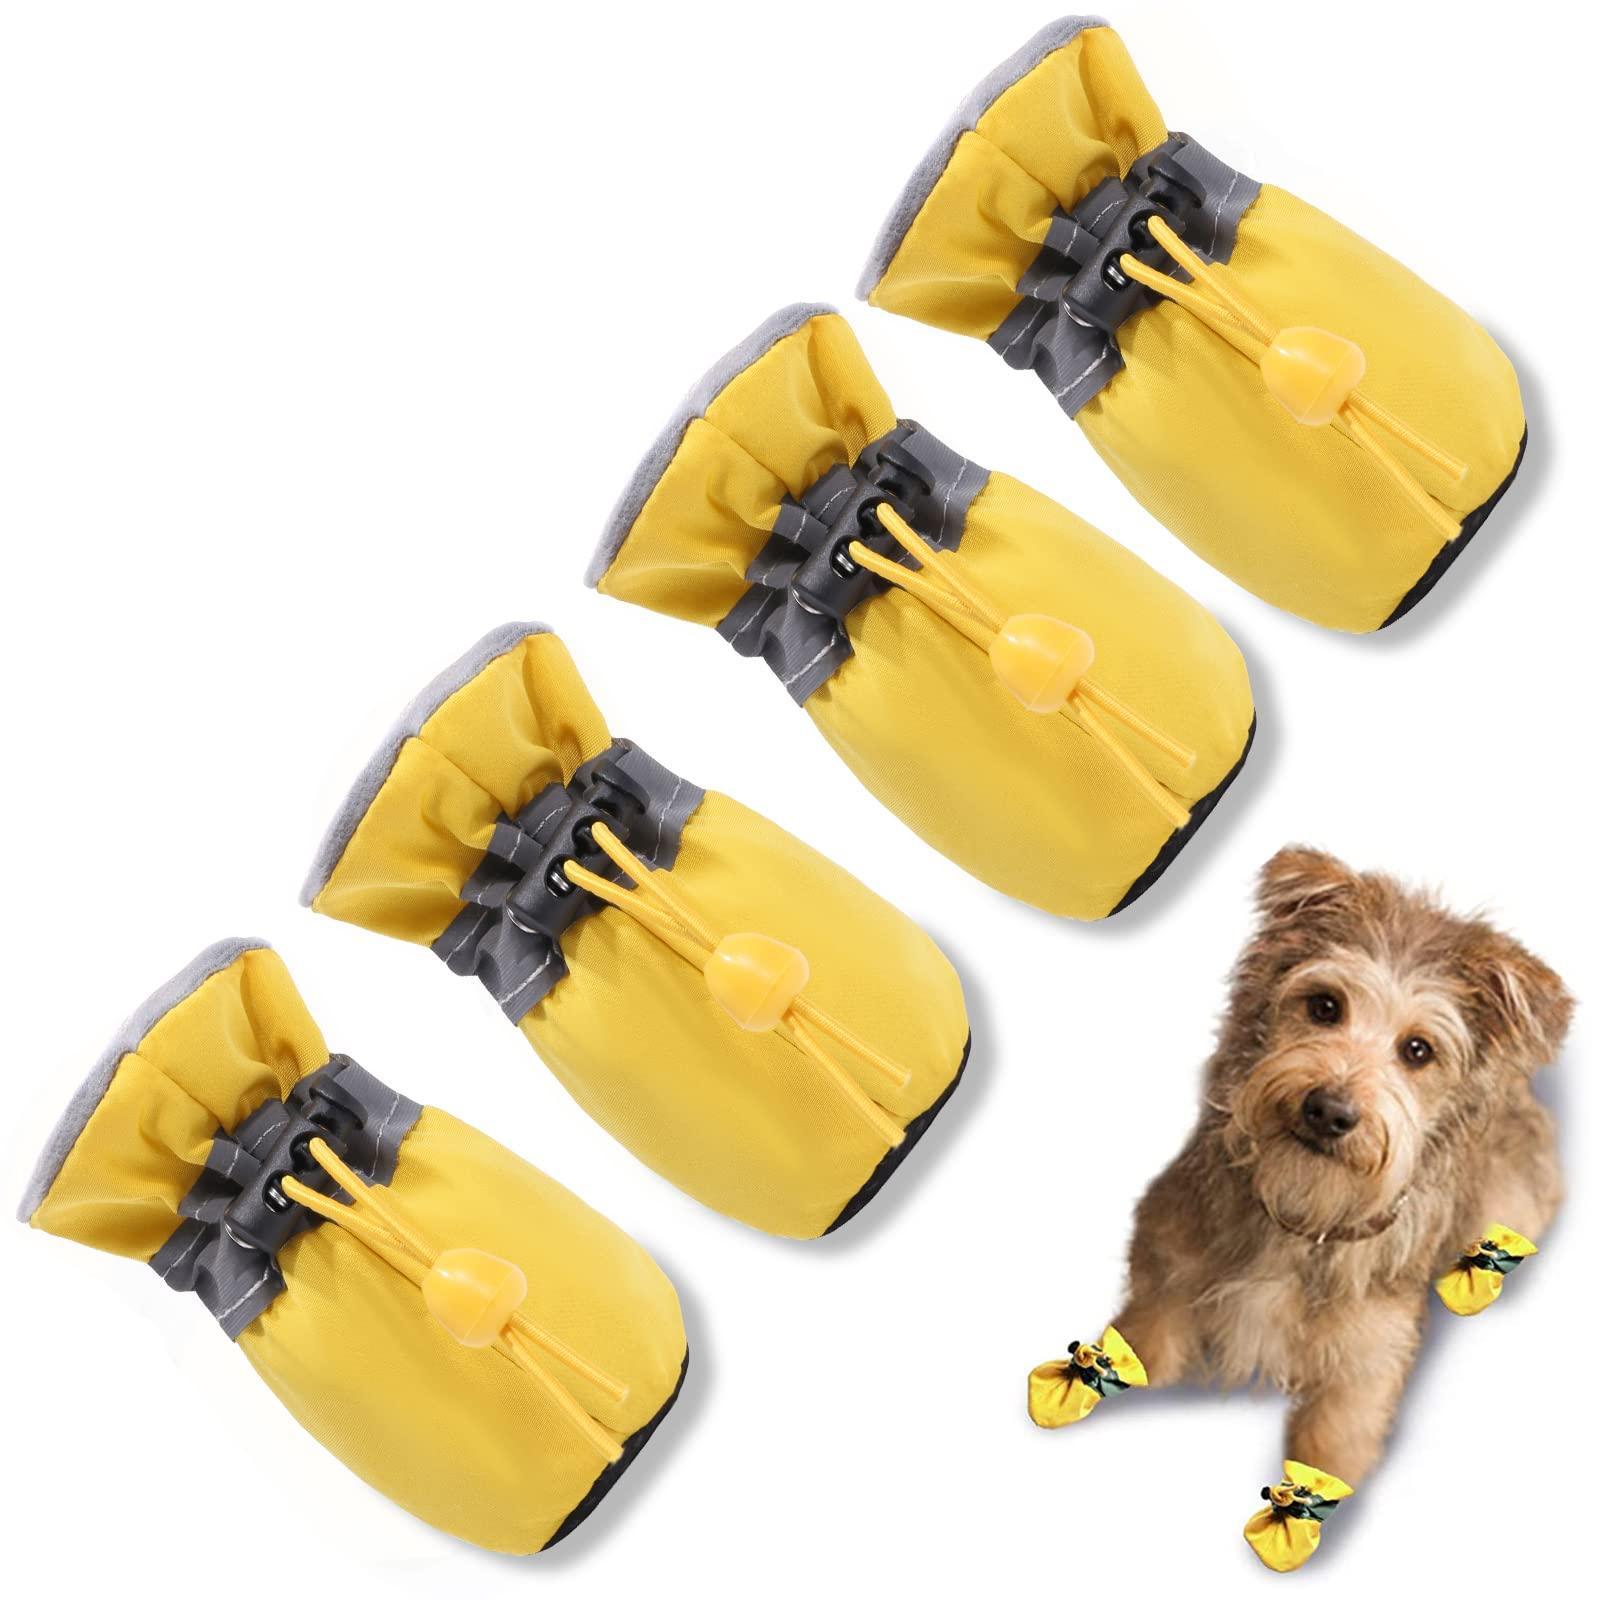 Protector with Reflective Strap Anti-Slip Dogs Boot 4PCS - iTalkPet